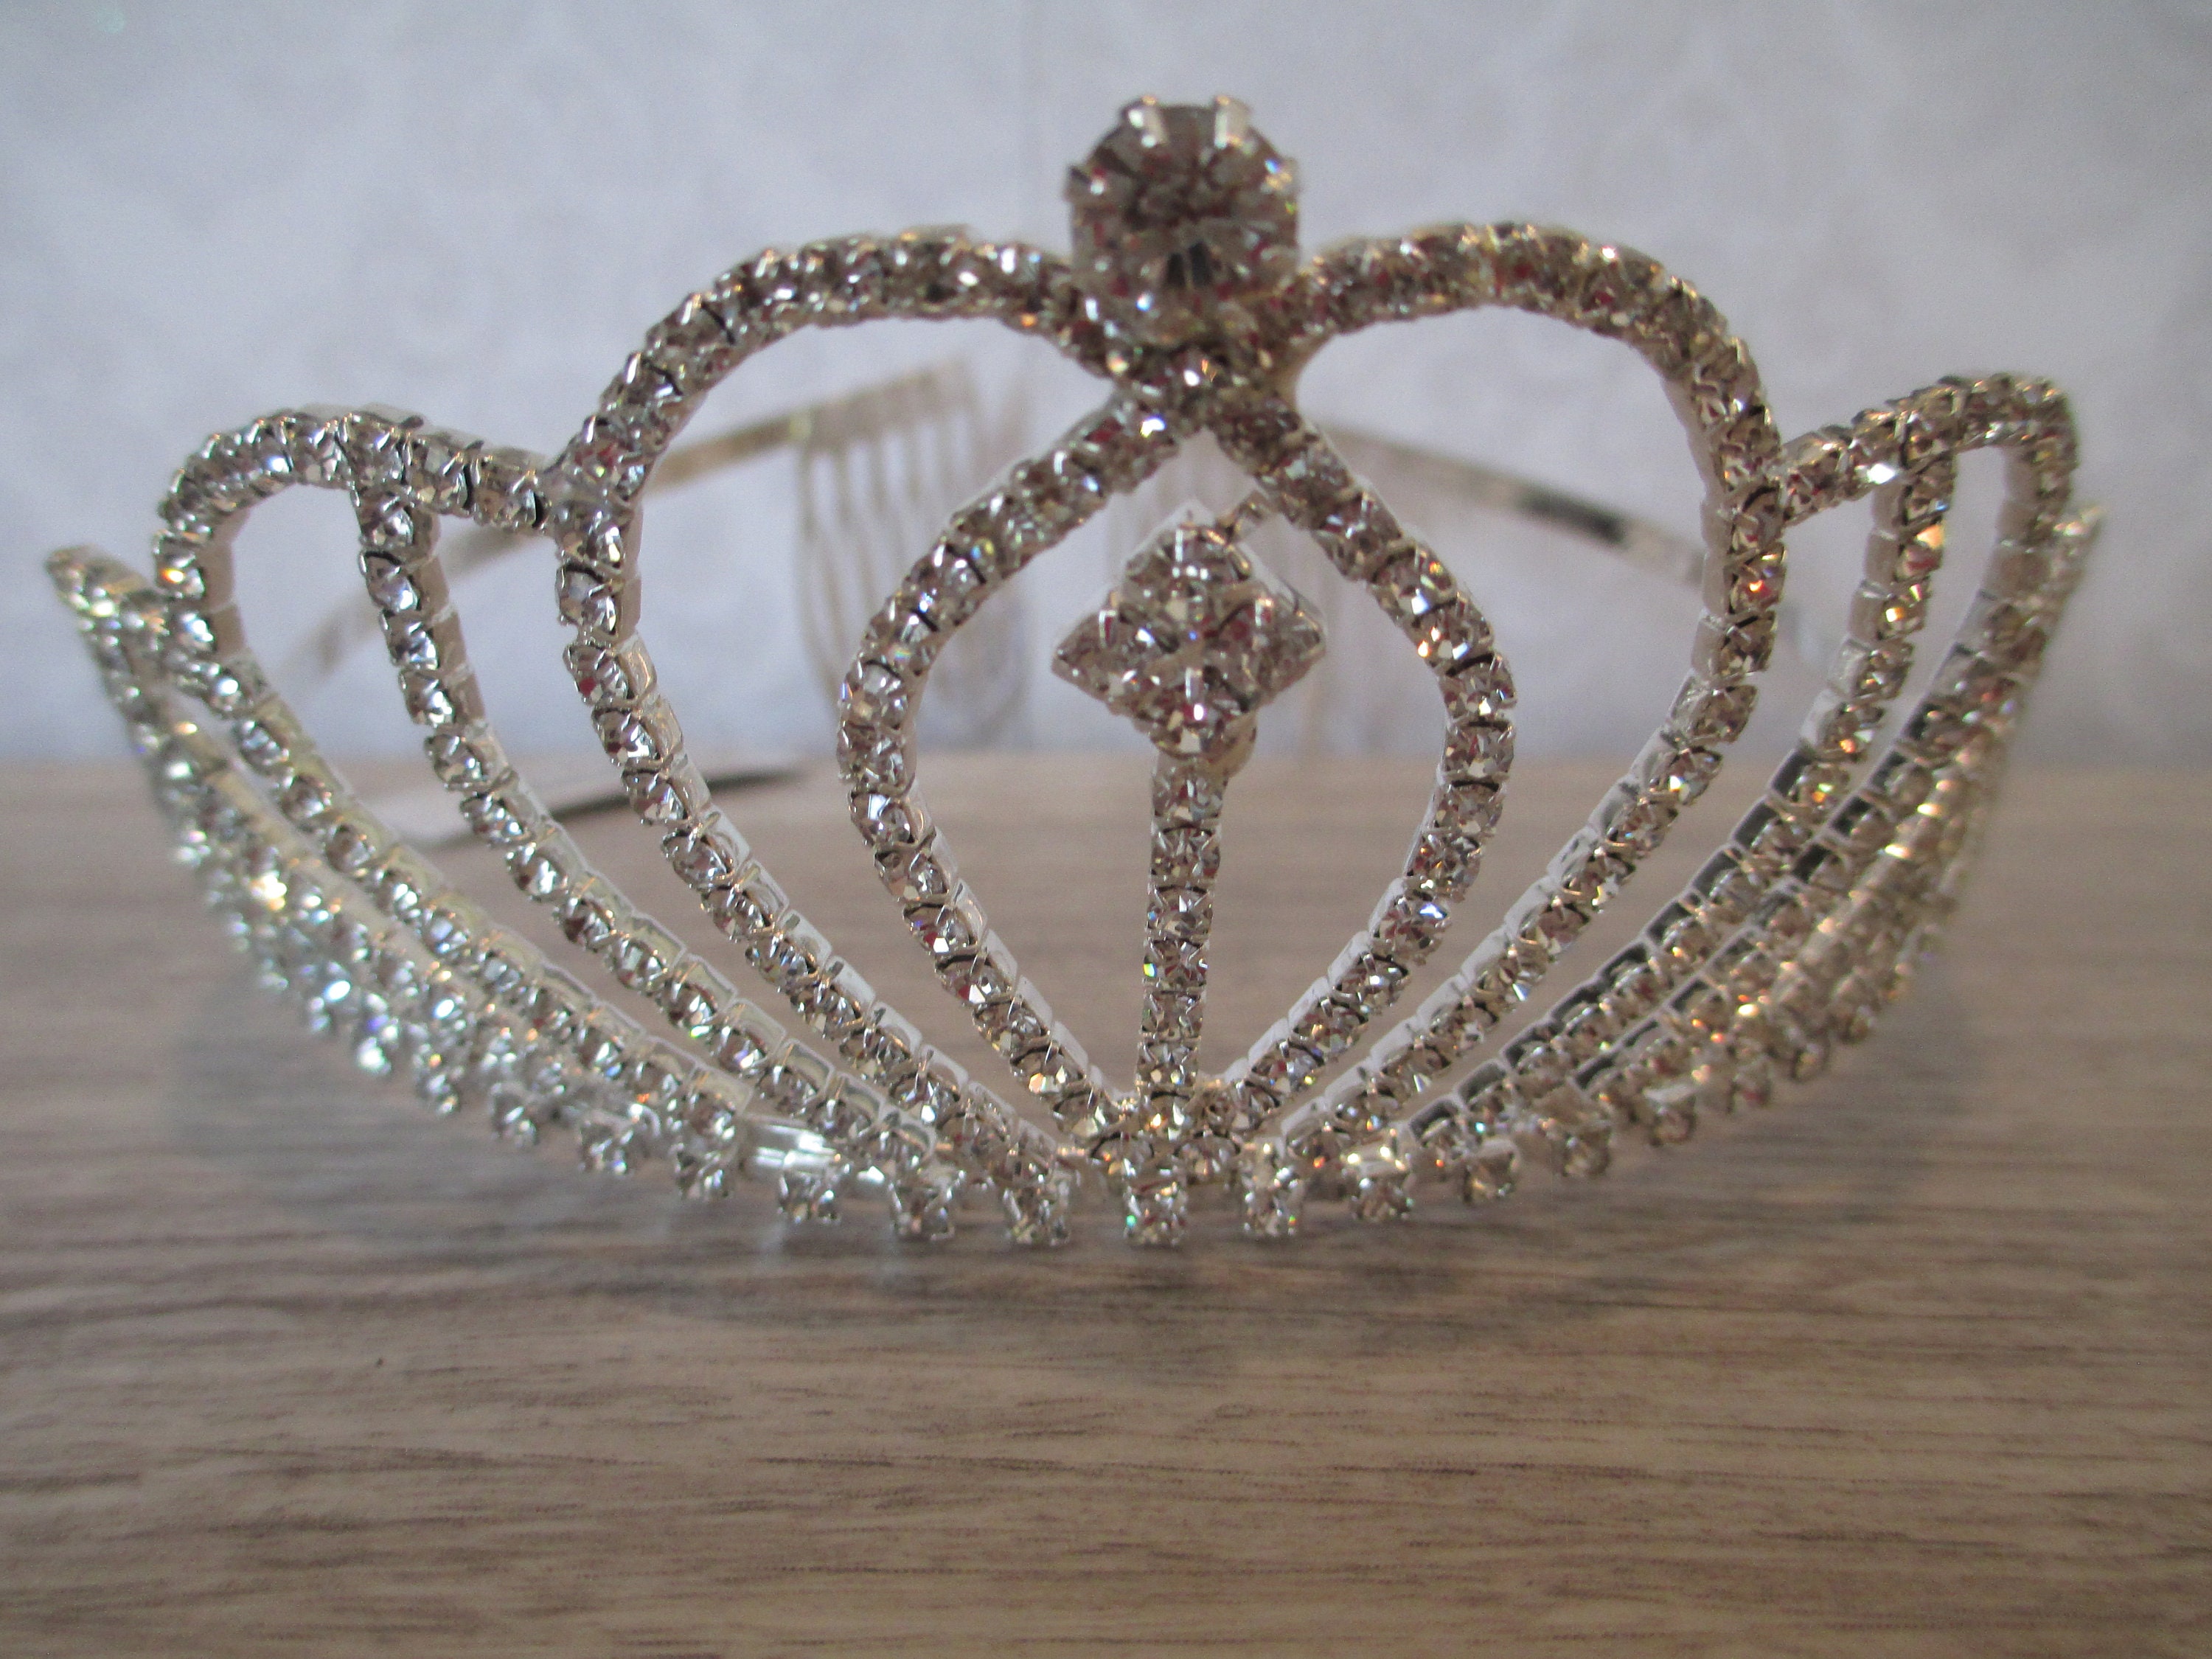 SSNUOY Silver Diamond Shape Tiaras for Brides Pageant Queen Crowns Prom Wedding 